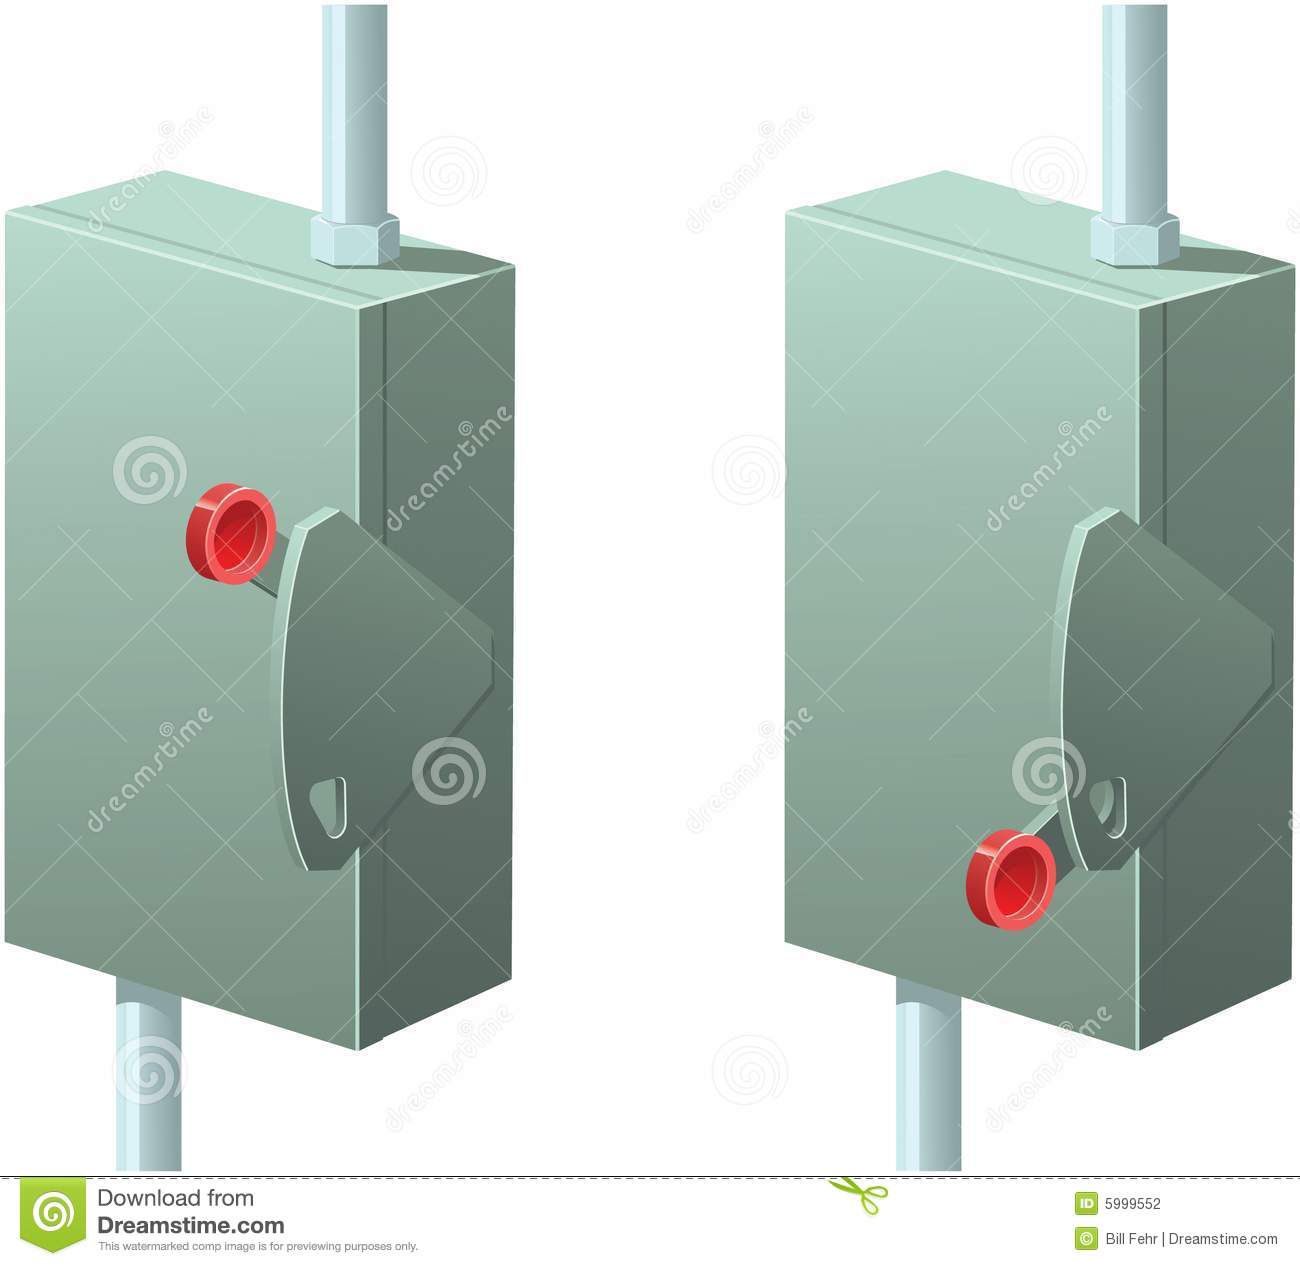 More Similar Stock Images Of   Electrical Box With Shutoff